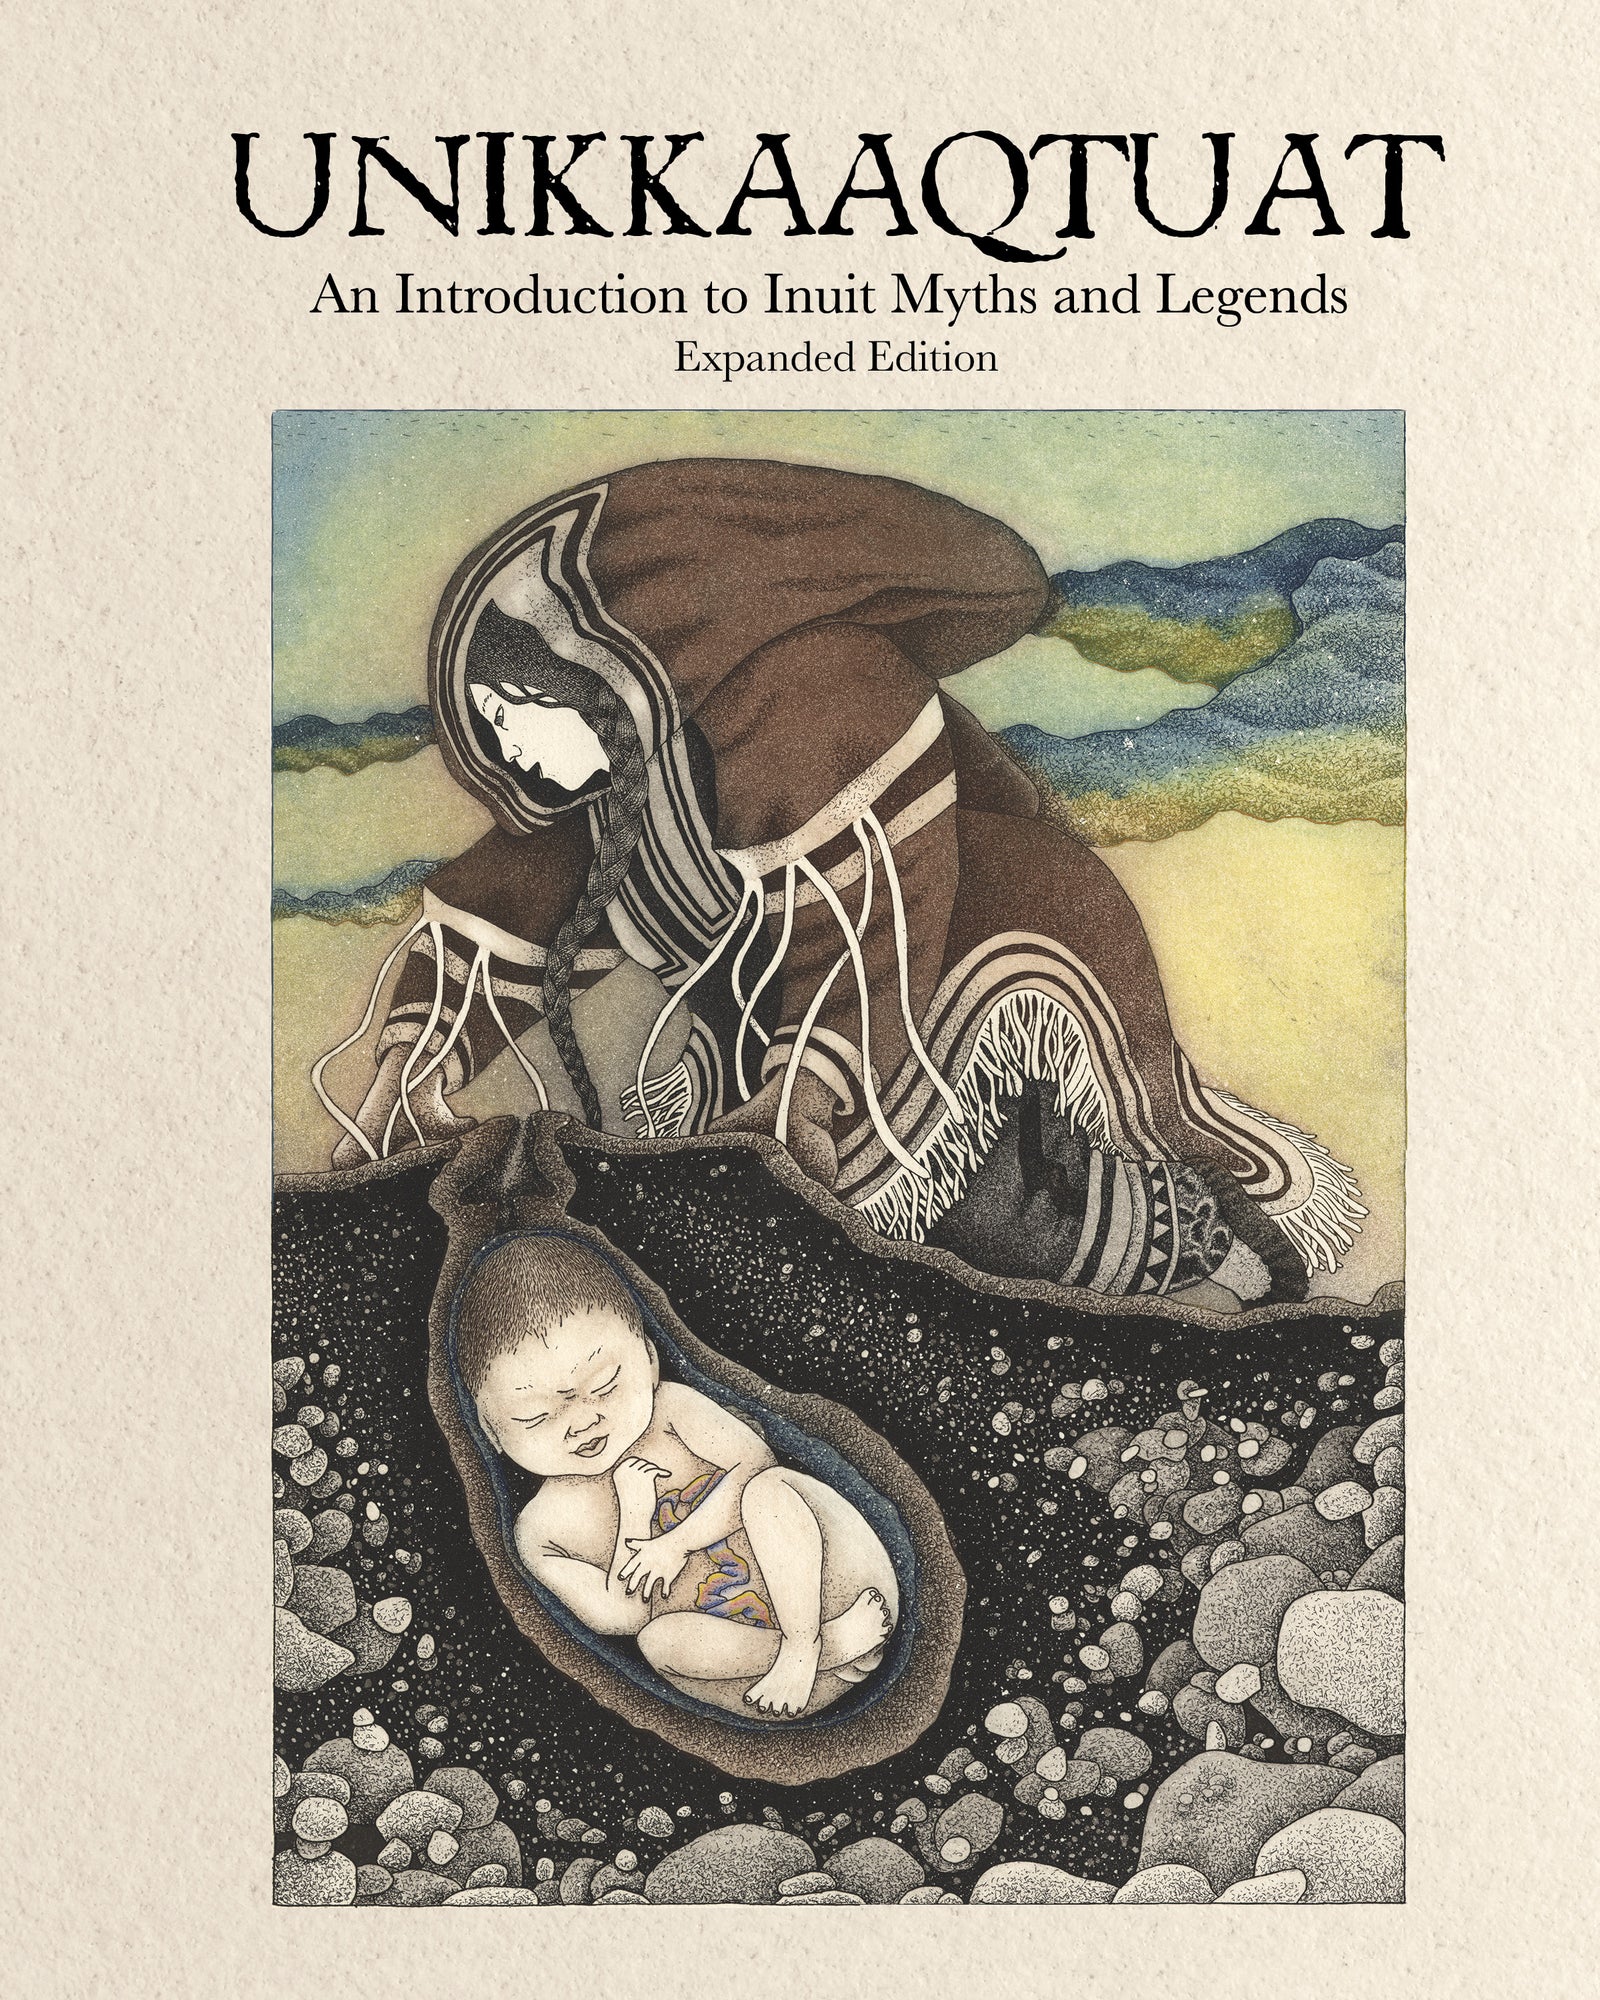 Unikkaaqtuat : An Introduction to Inuit Myths and Legends (Expanded Edition)